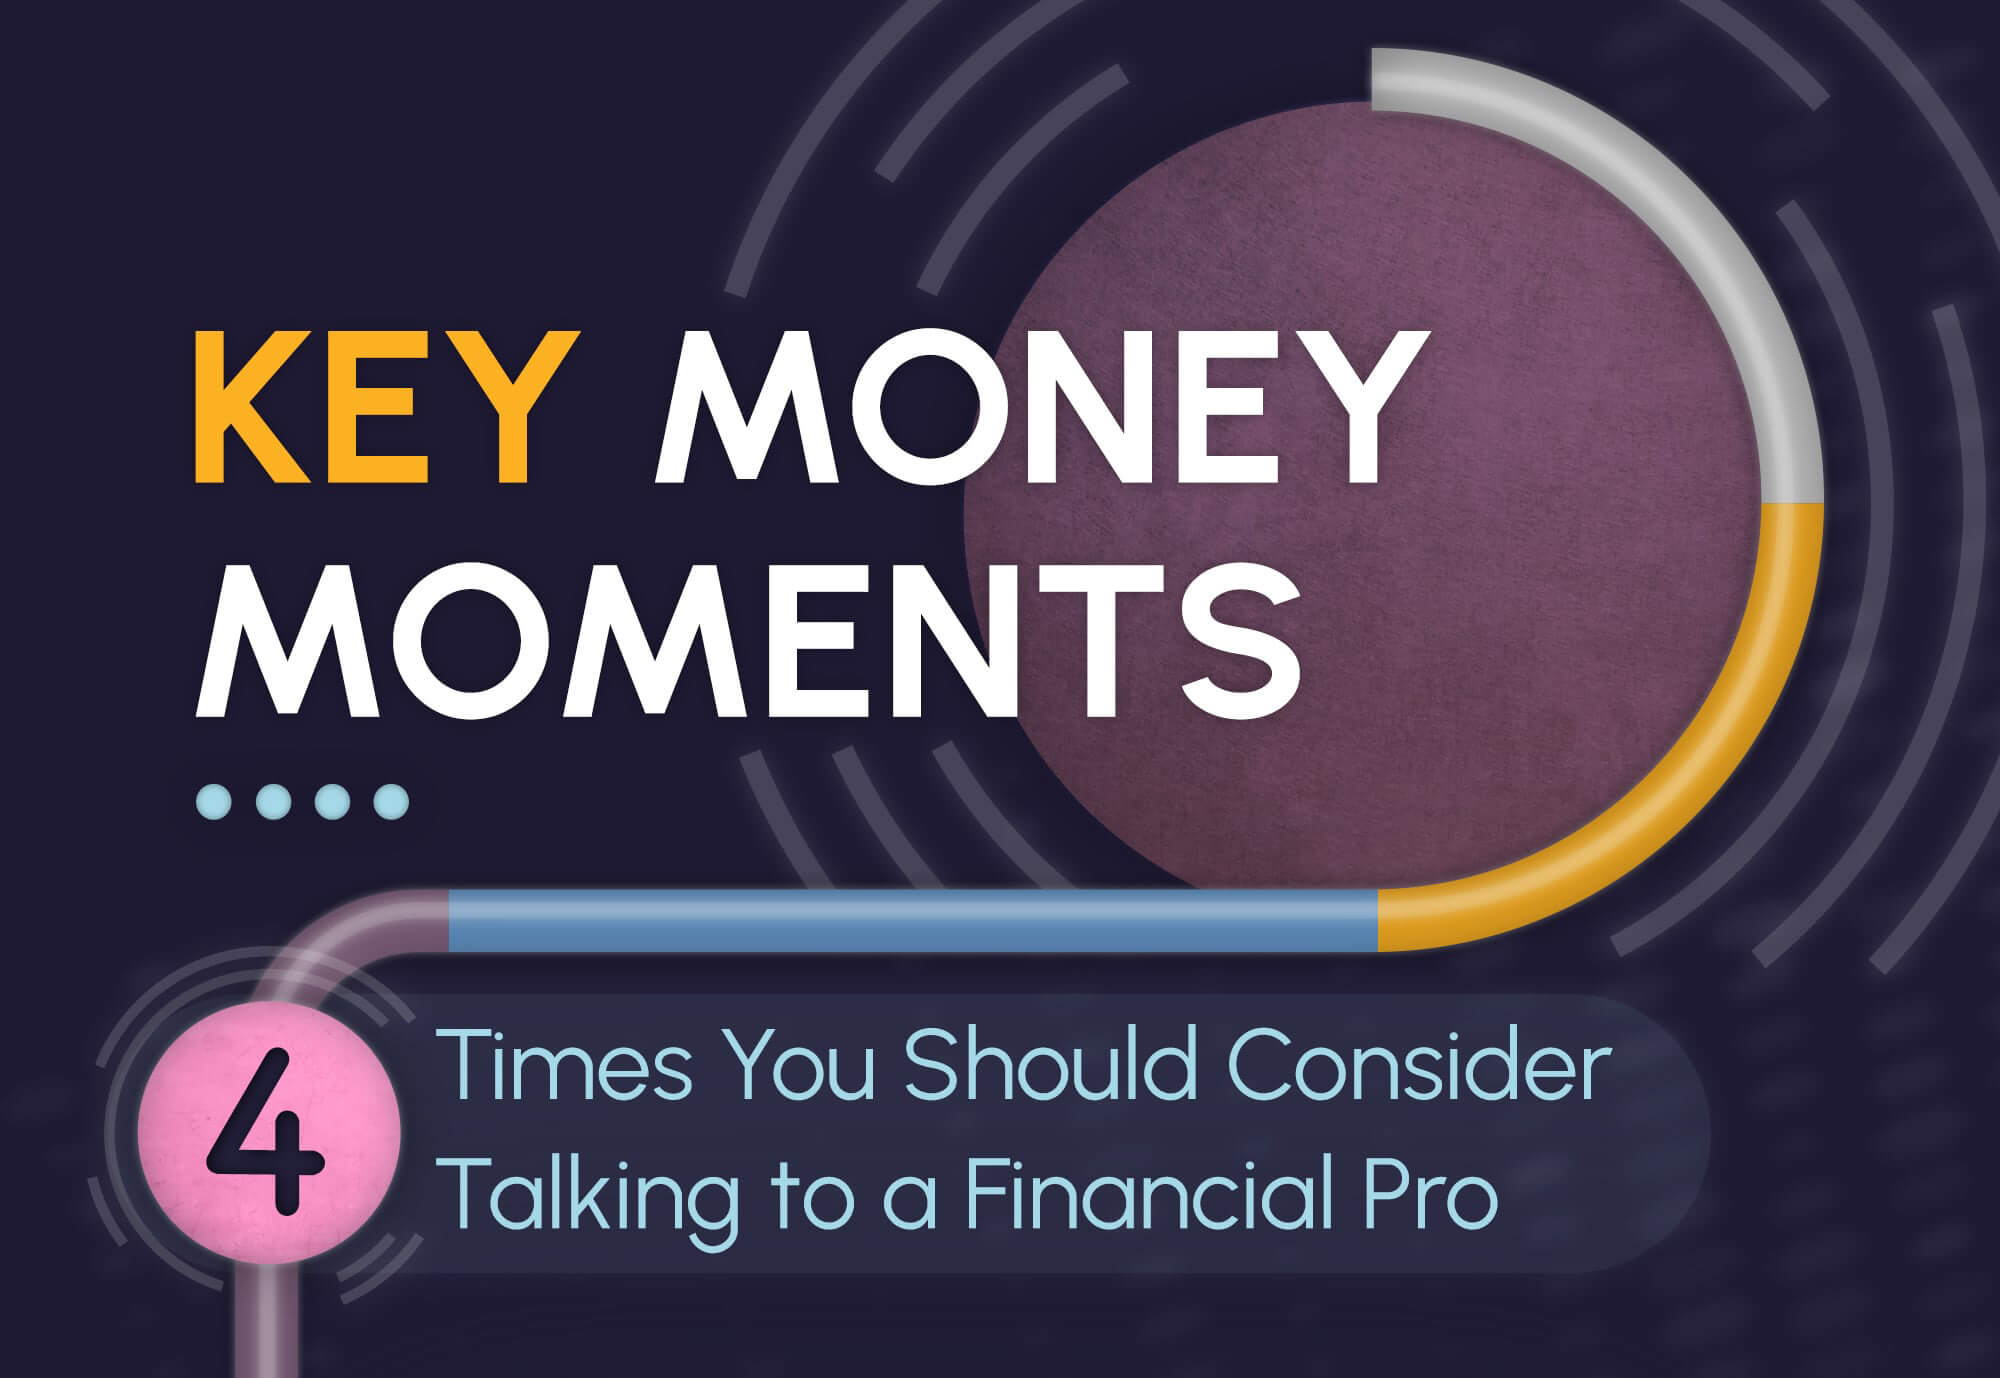 The top of the infographic has a small circular labyrinth and a path exiting the labyrinth that leads down to the title of the infographic. The title is Four Times You Should Consider Talking to a Financial Pro.